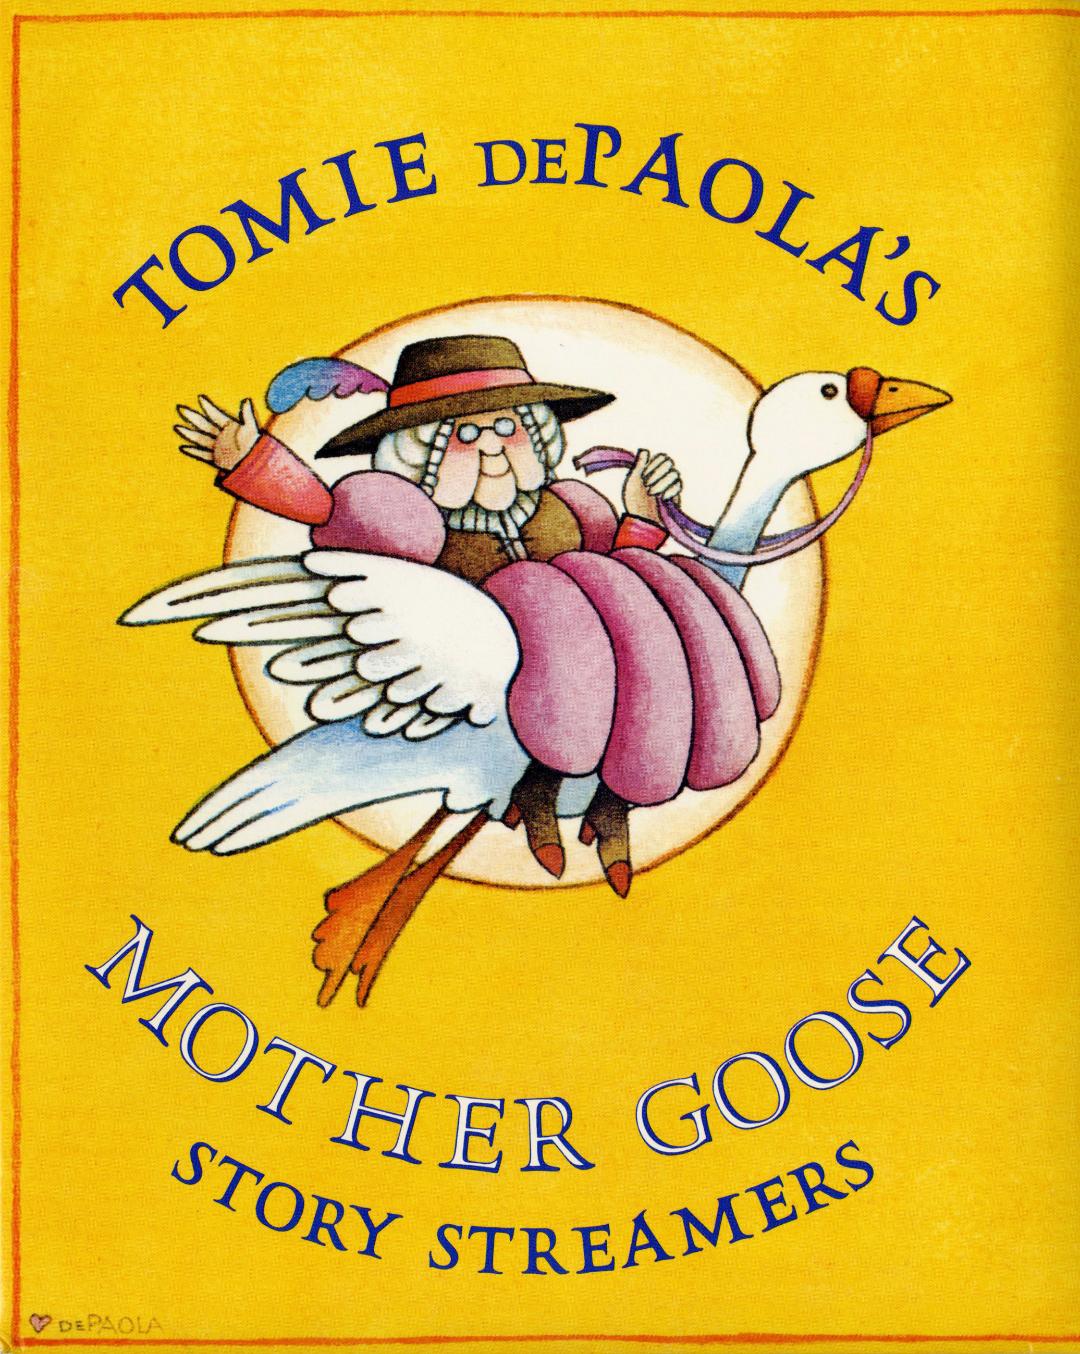 Tomie dePaola's Mother Goose Story Streamers US.jpg